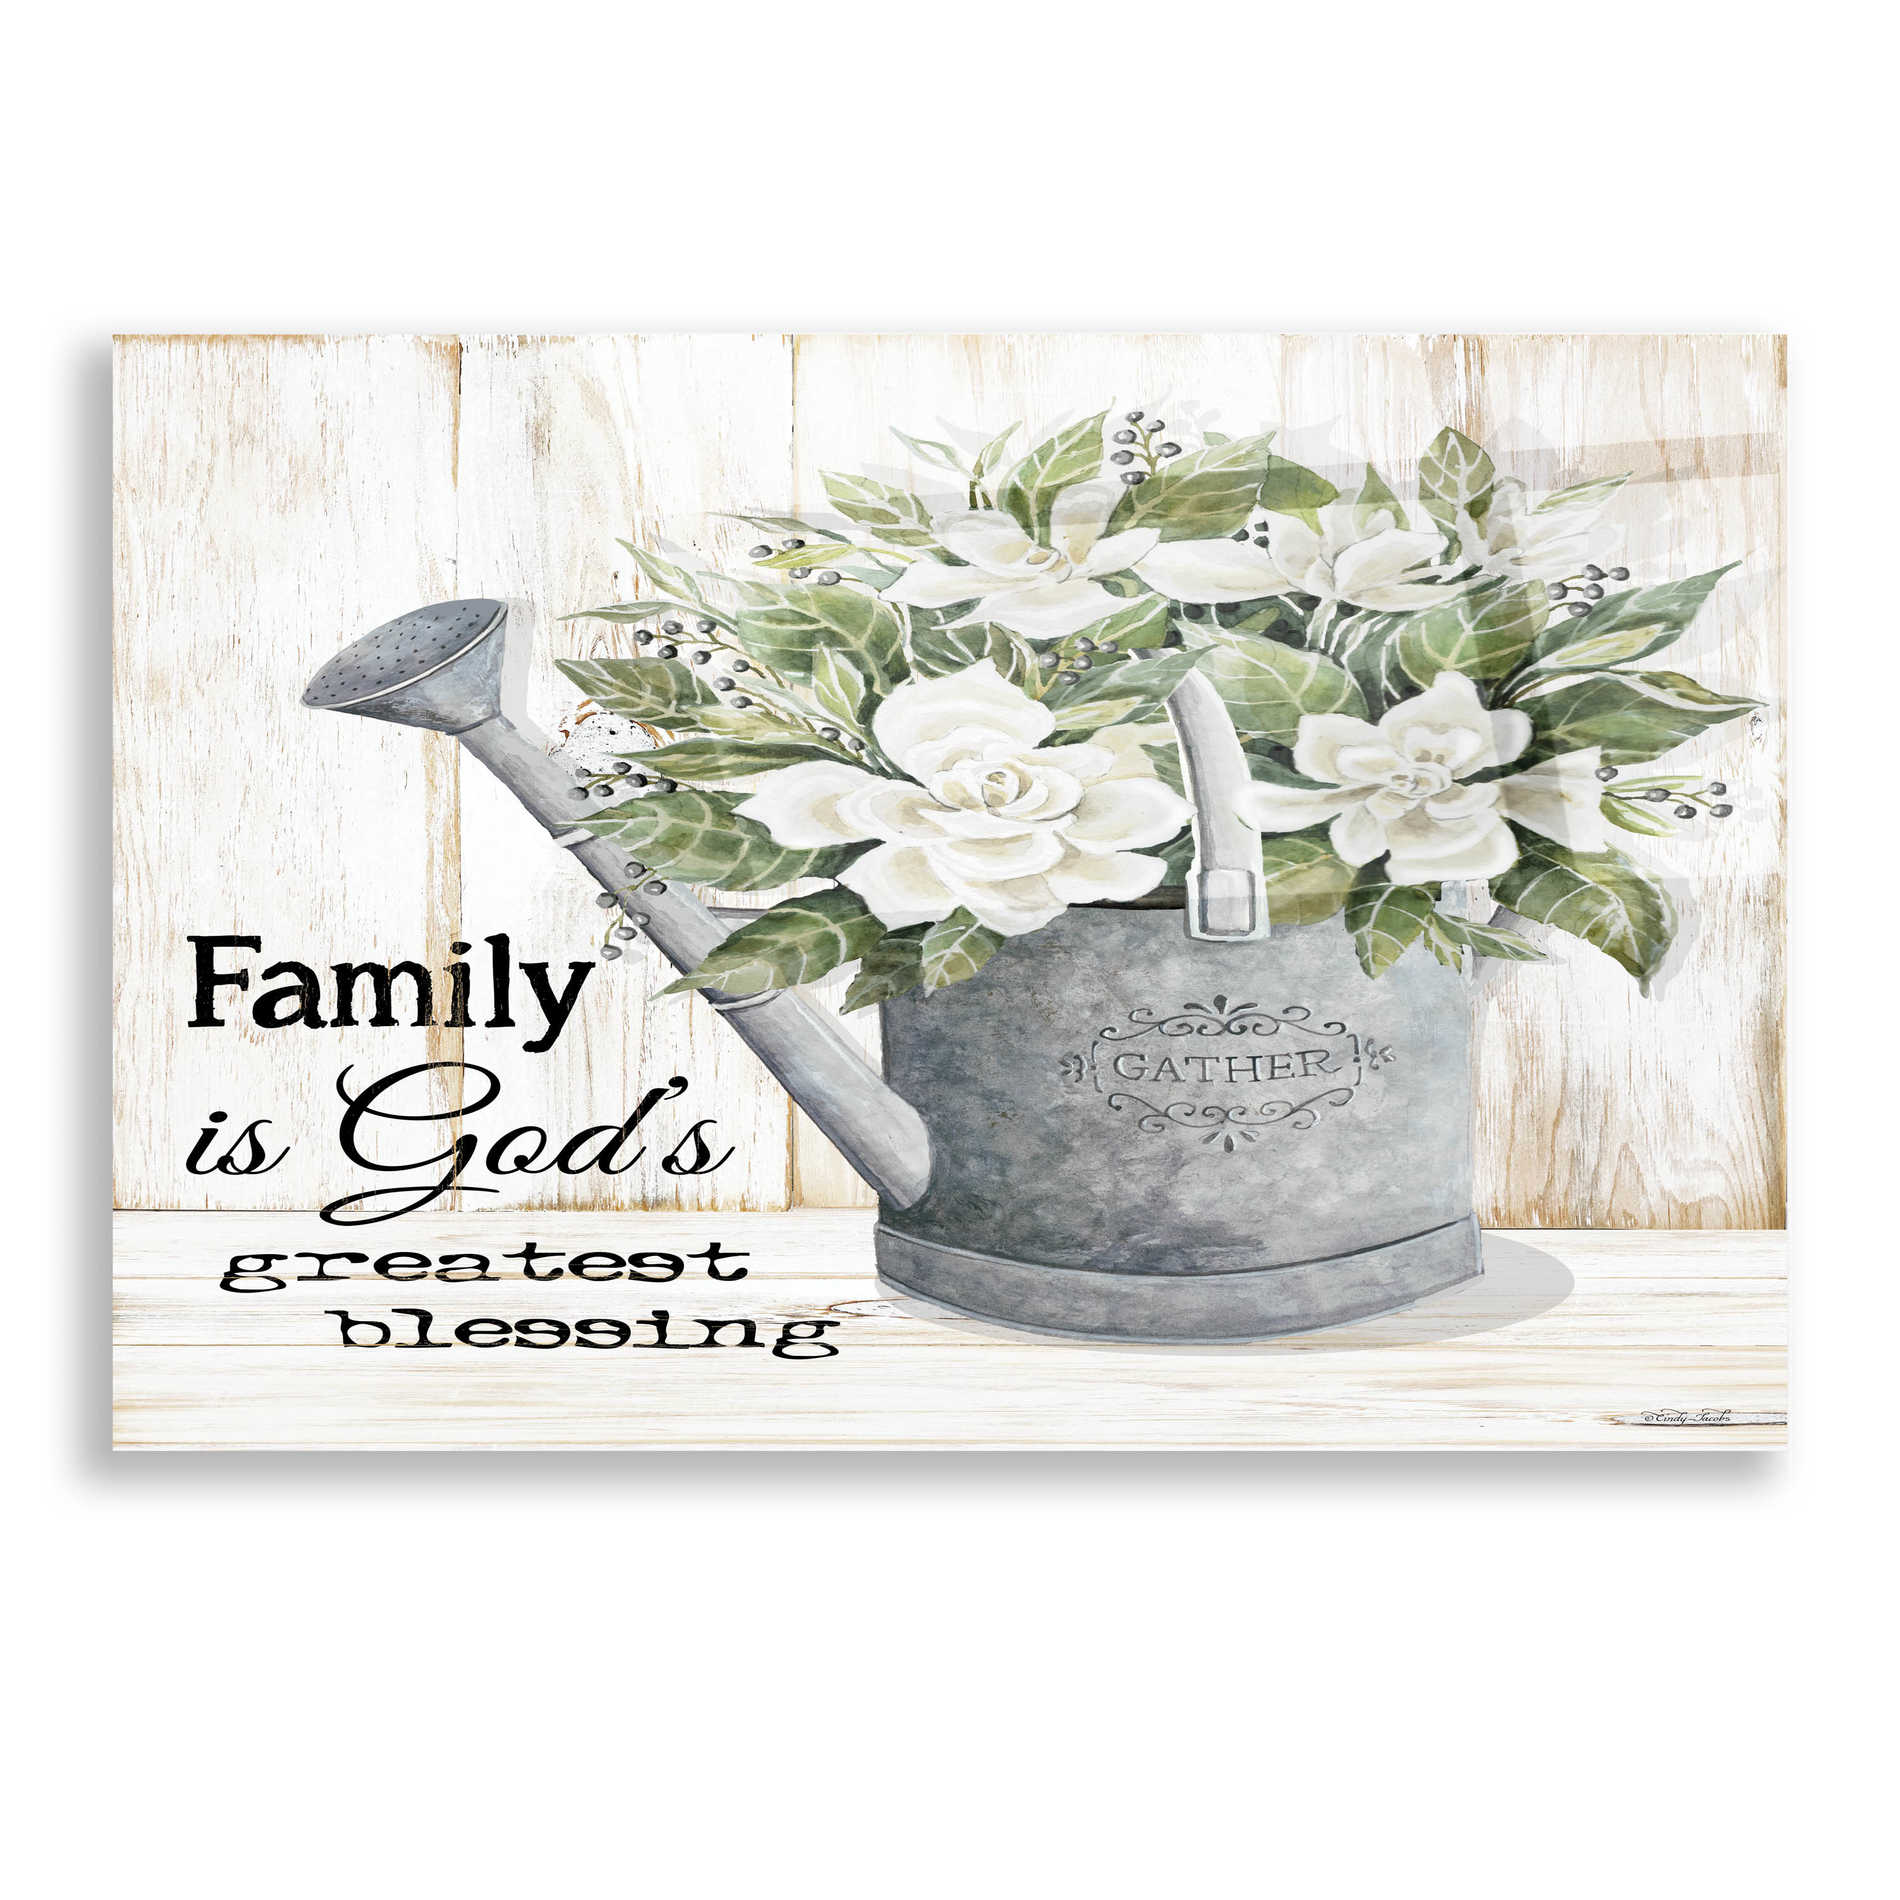 Epic Art 'Family is God's Greatest Blessing' by Cindy Jacobs, Acrylic Glass Wall Art,16x12